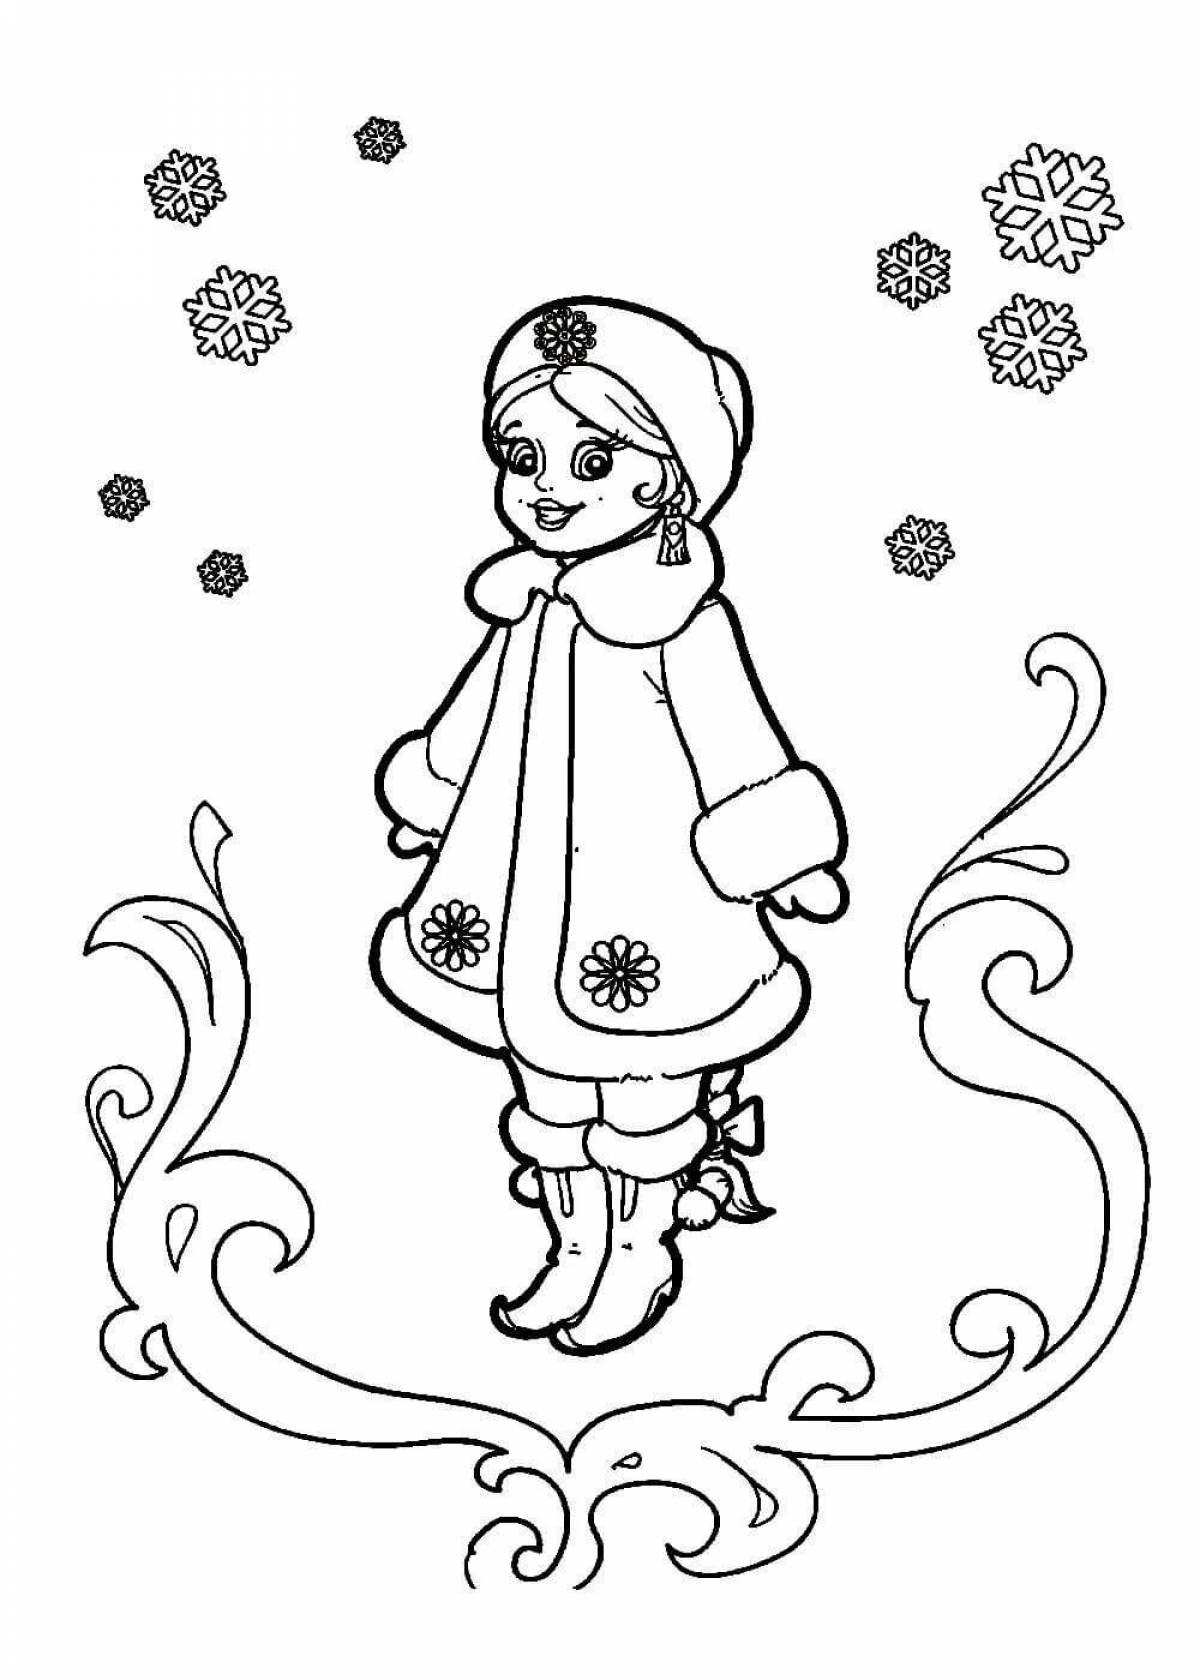 Colored snow maiden #8